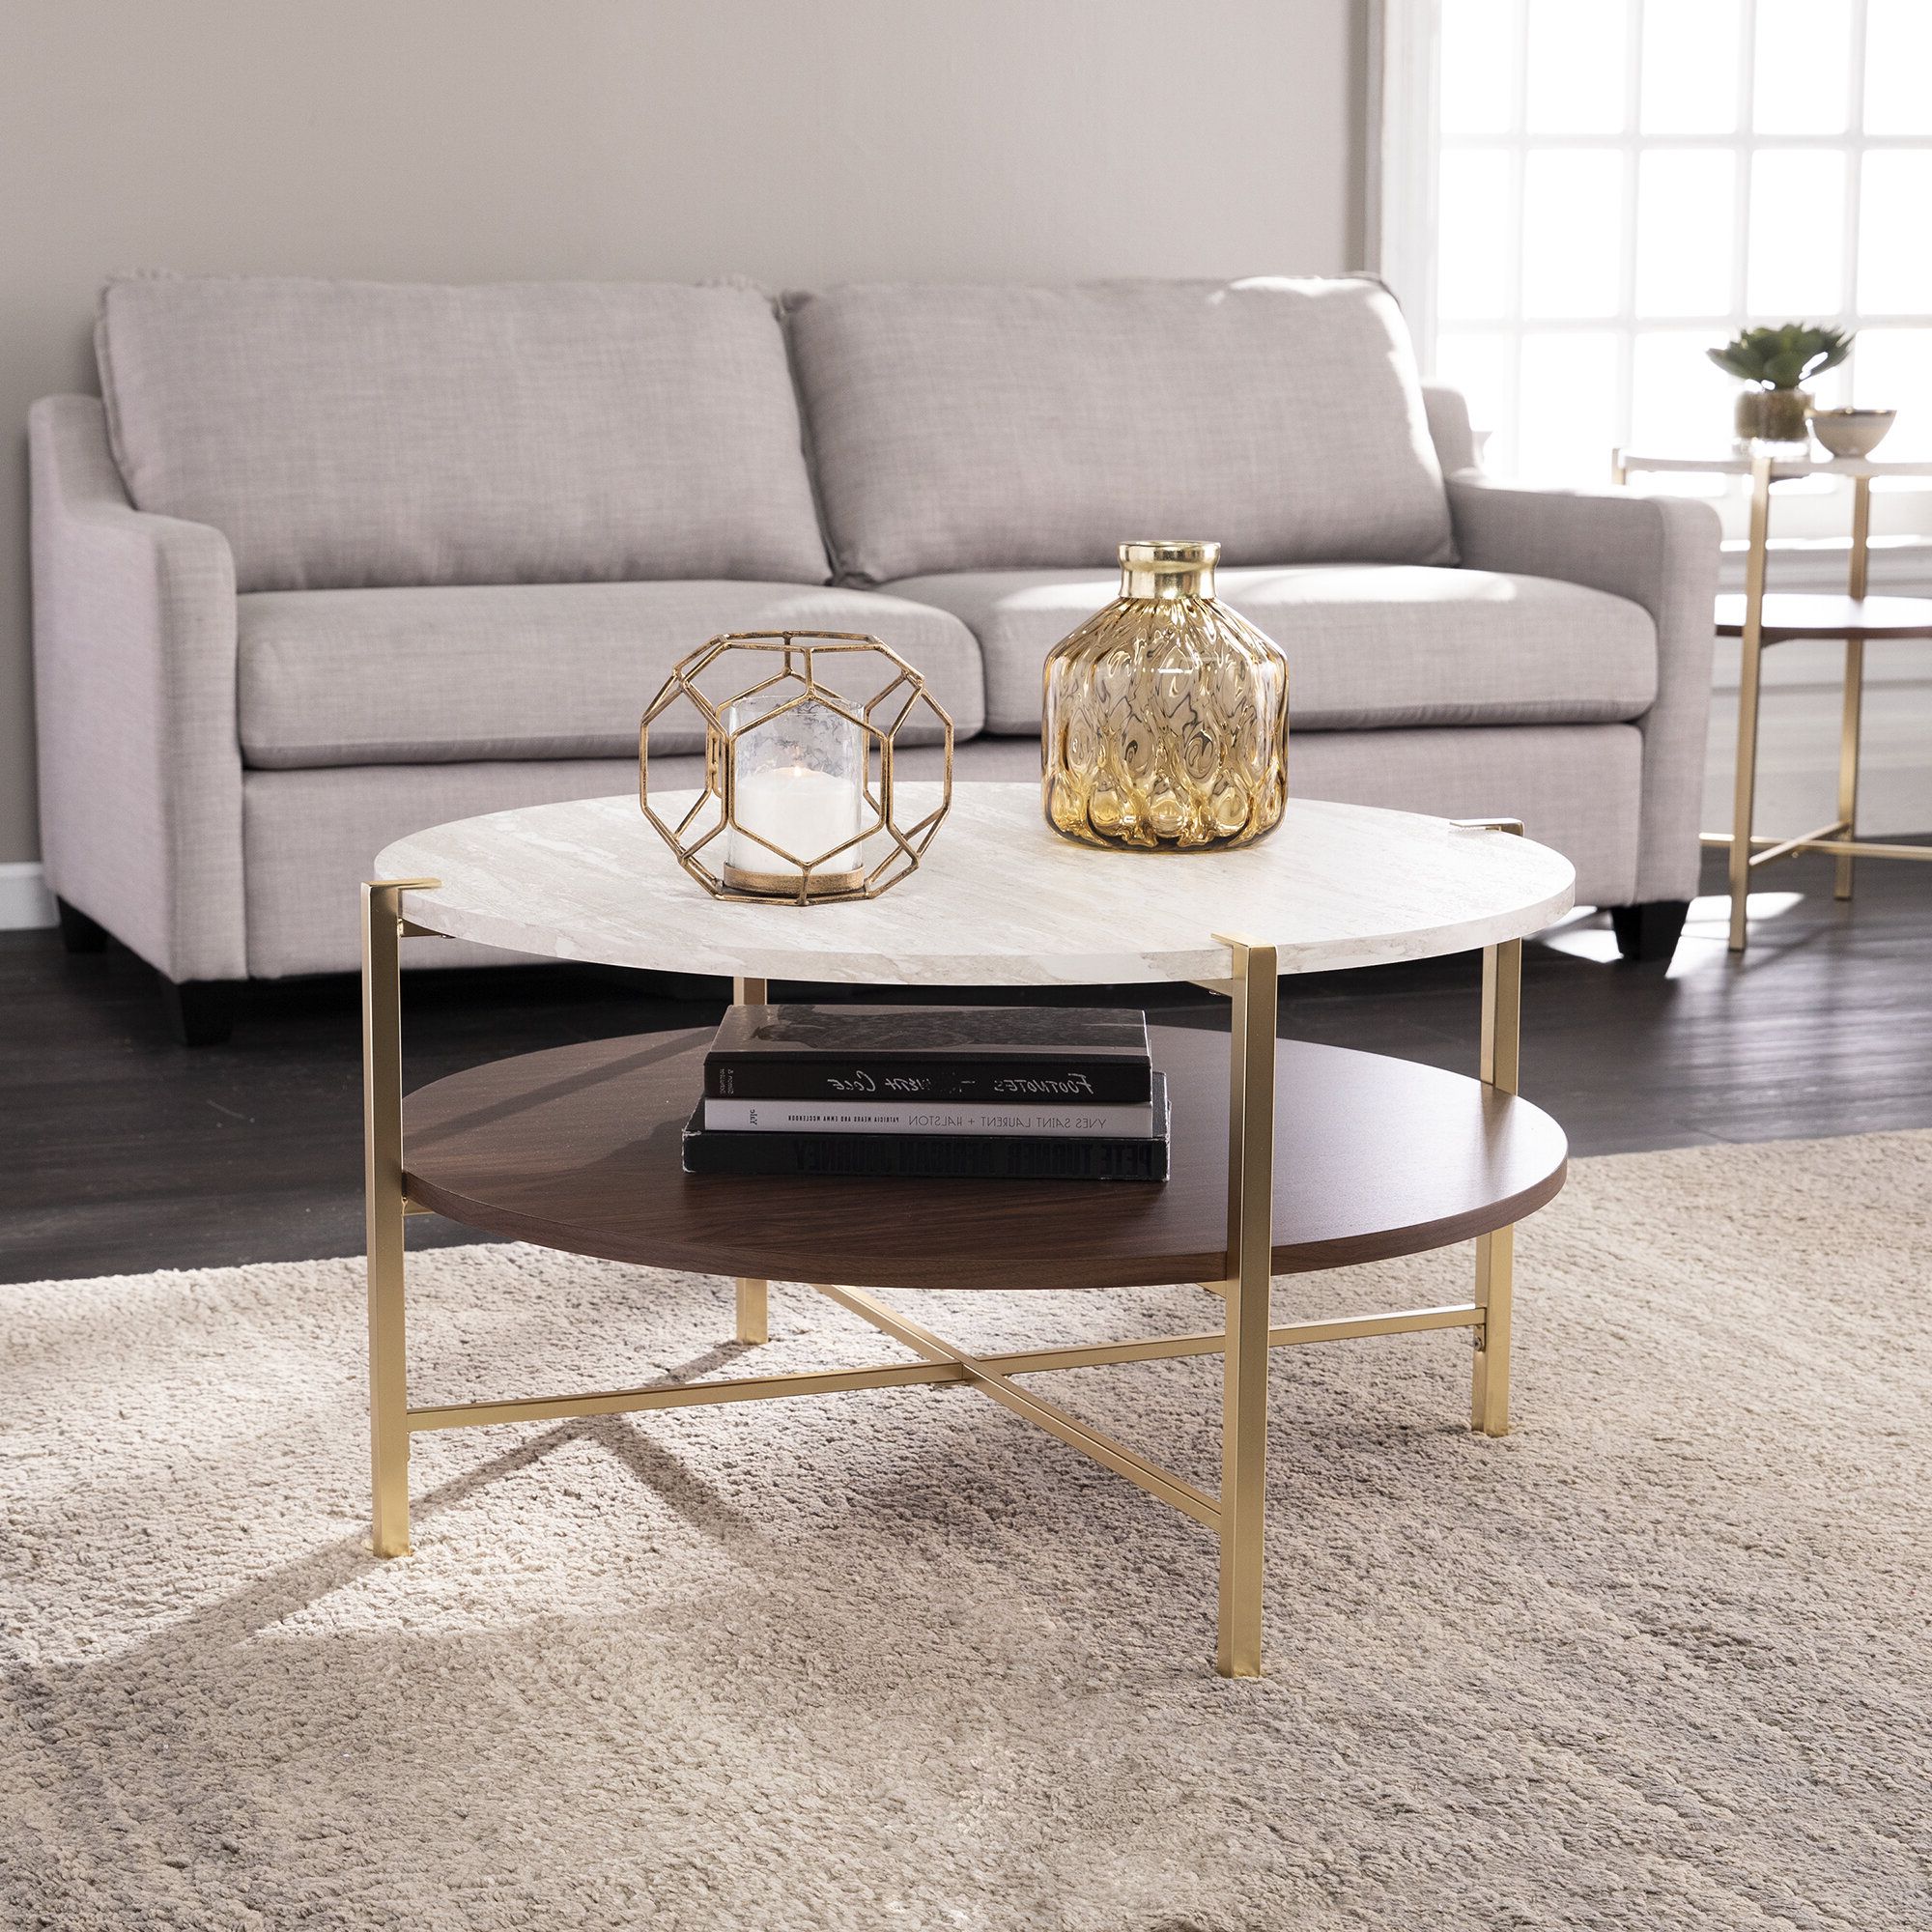 2019 Faux Marble Top Coffee Tables Throughout Willa Arlo Interiors Trosper Coffee Table With Storage & Reviews (View 9 of 20)